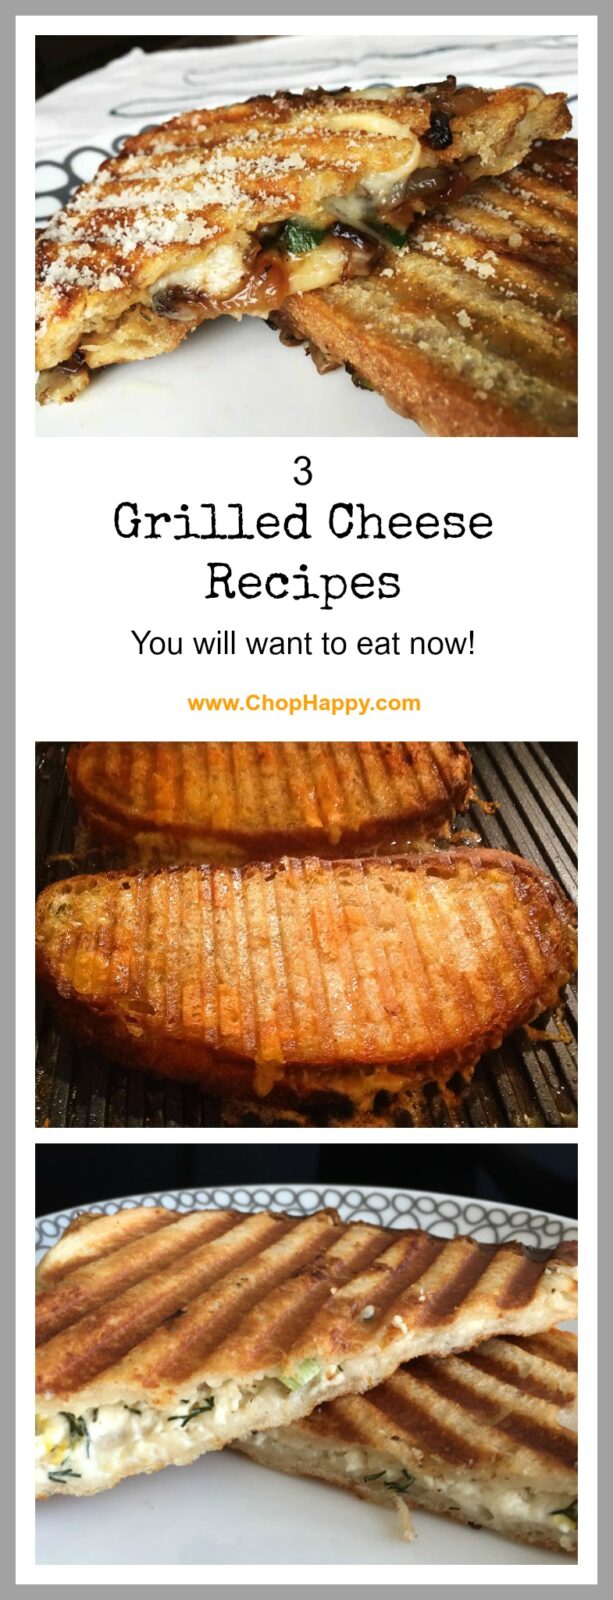 3 Grilled Cheese Recipes- that are so cheesy and yummy it will brighten up any weeknight! www.ChopHappy.com